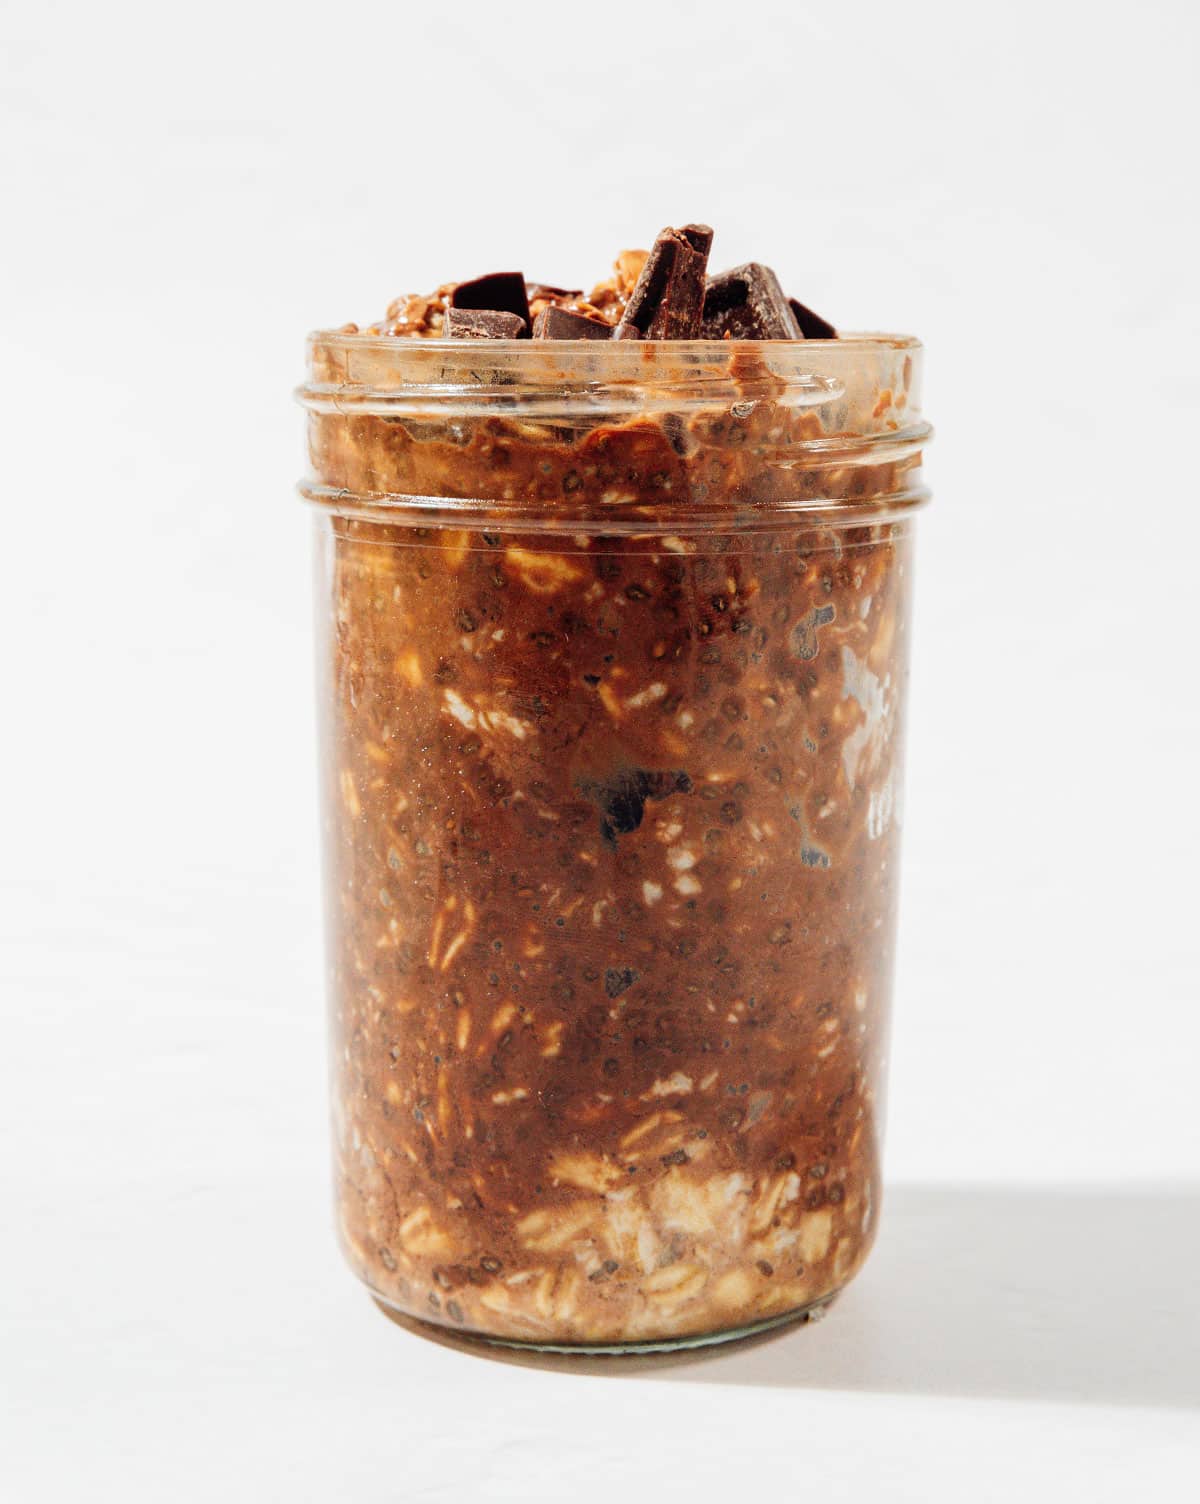 Chocolate overnight oats in a jar.